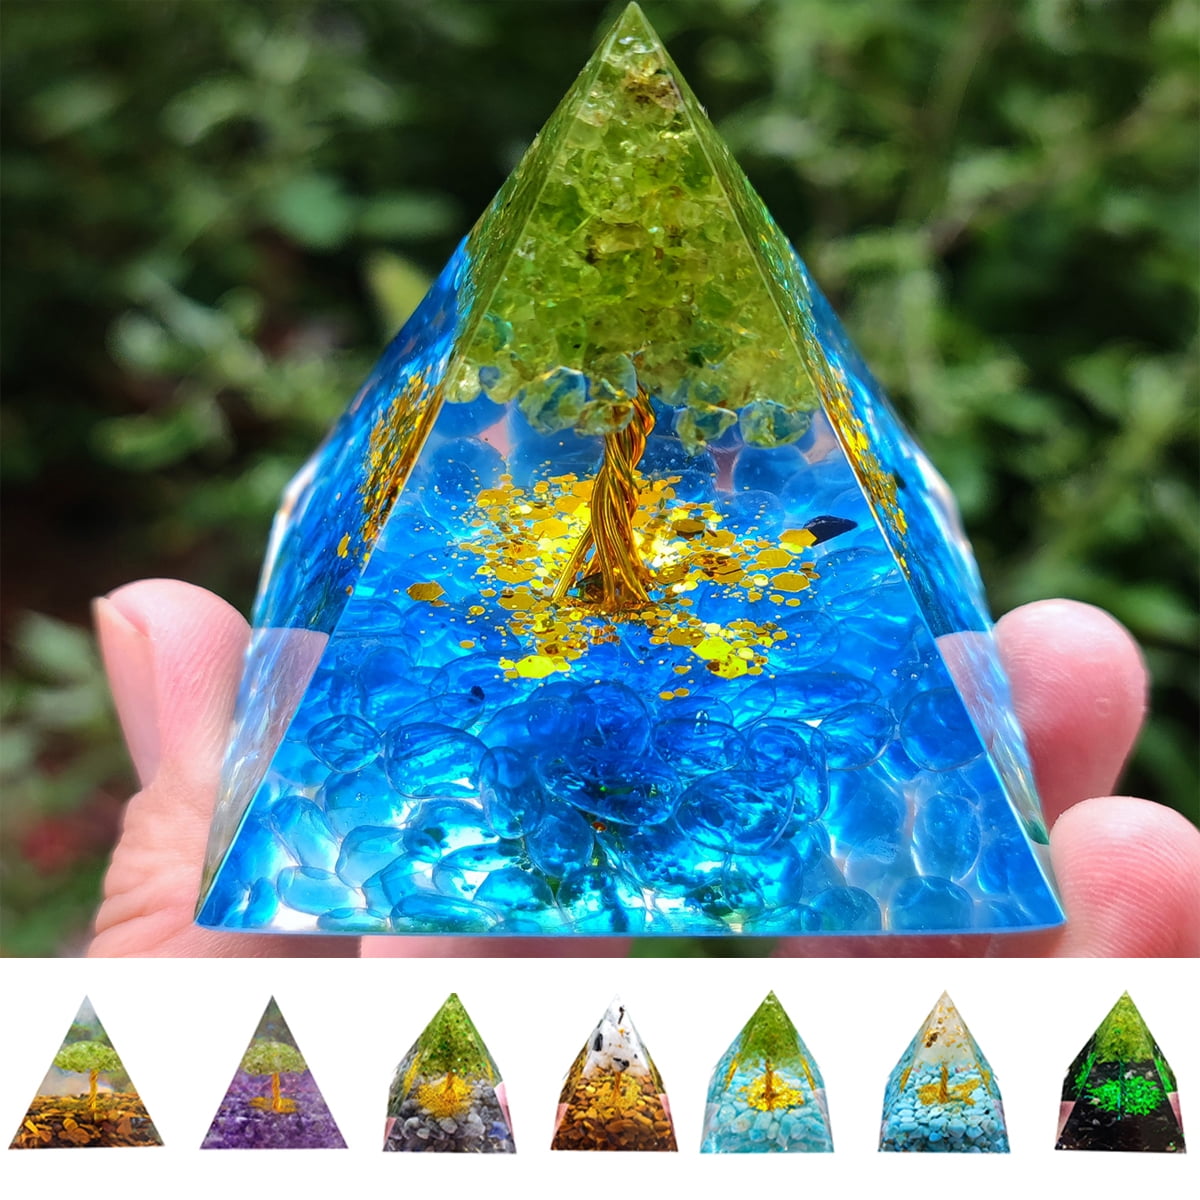 Travelwant Crystal Triple Money Energy Generator Promotes Wealth and Prosperity with Green Aventurine, Red Garnet and – Attract Money and Success with Lucky Orgone Crystals - Walmart.com